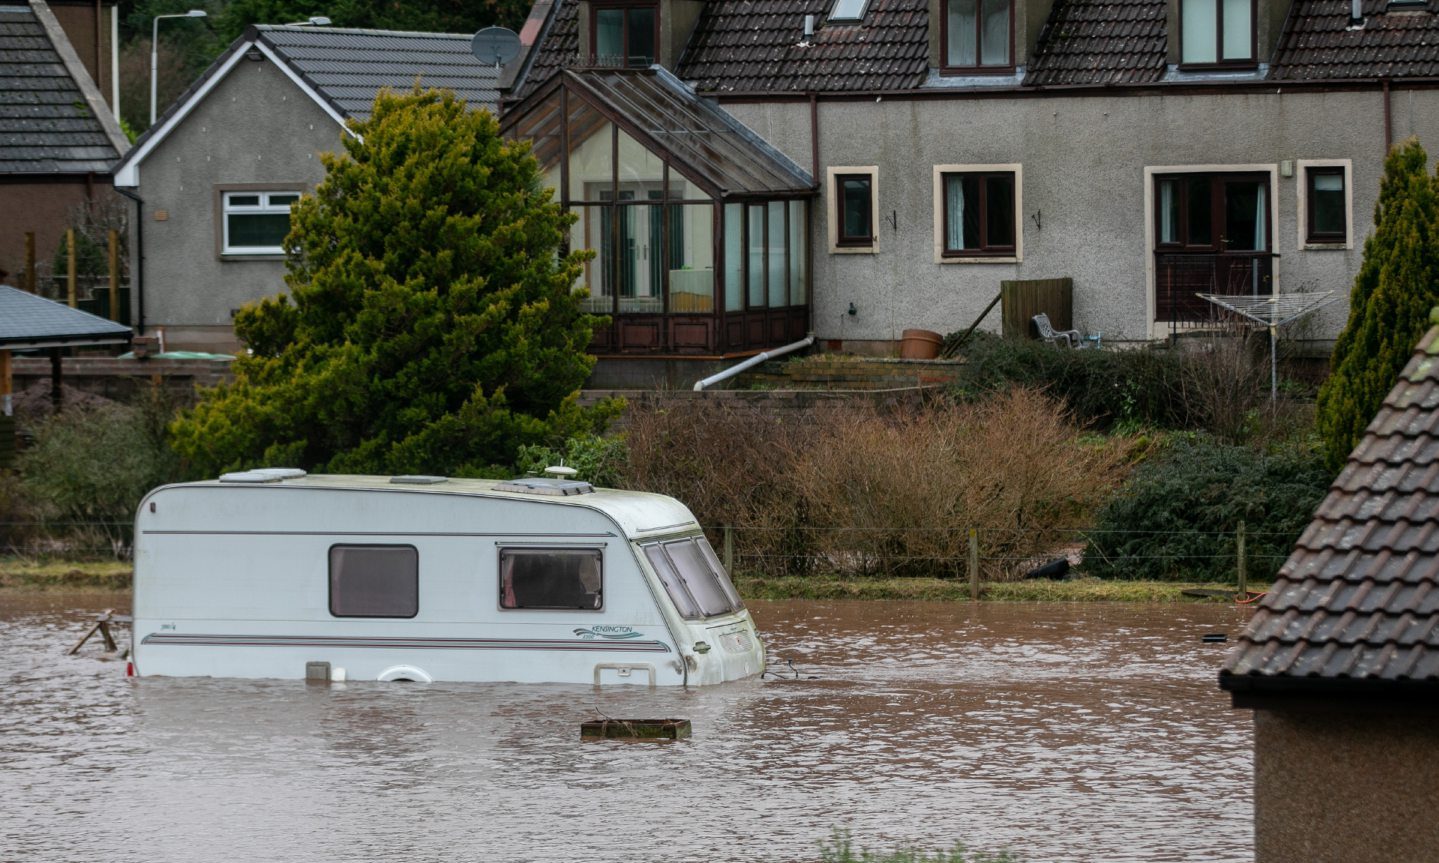 A stored caravan was caught up in the flooding at Strathmiglo during Storm Gerrit.